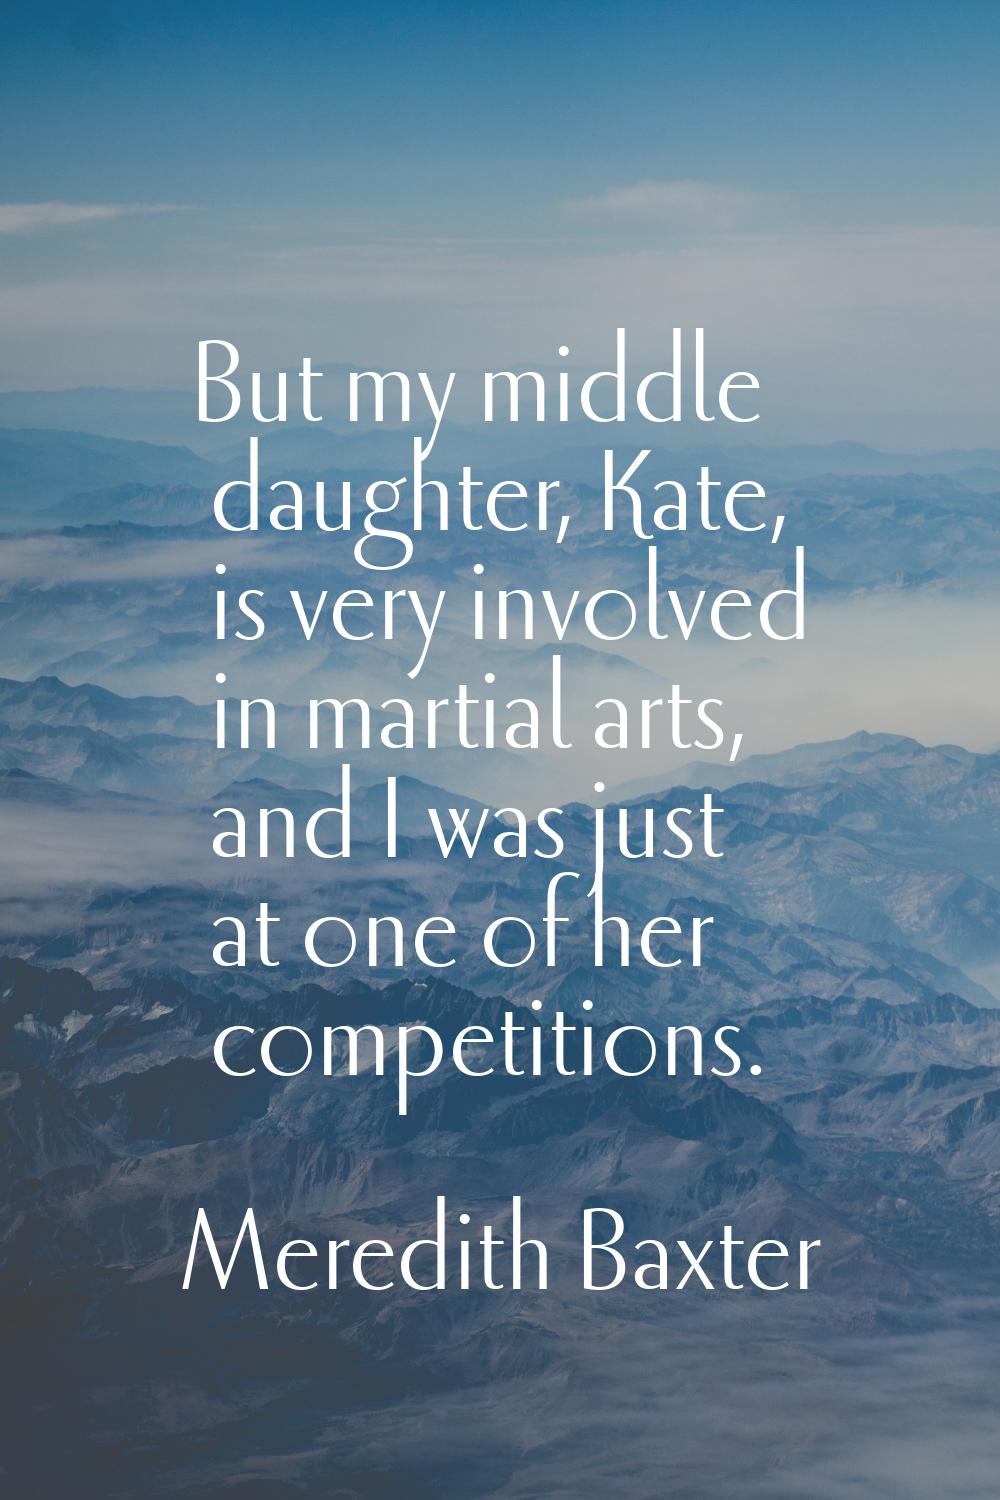 But my middle daughter, Kate, is very involved in martial arts, and I was just at one of her compet